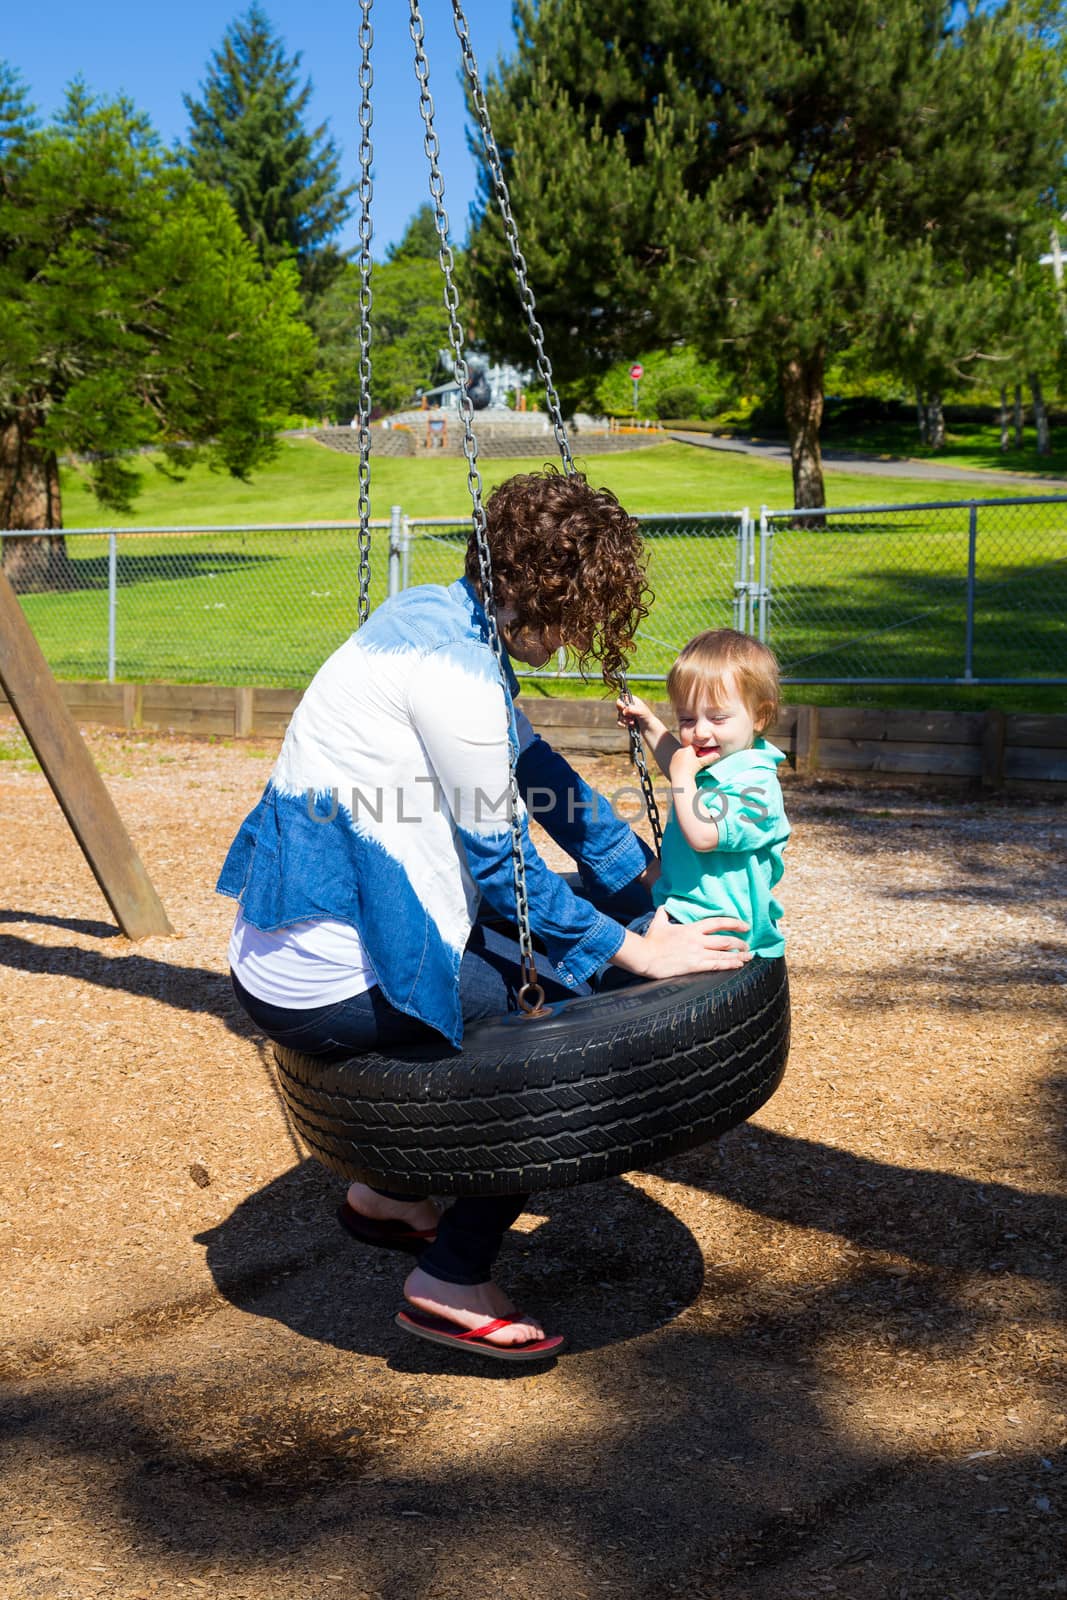 A son and his mom share a tire swing at the playground of a park in Oregon.